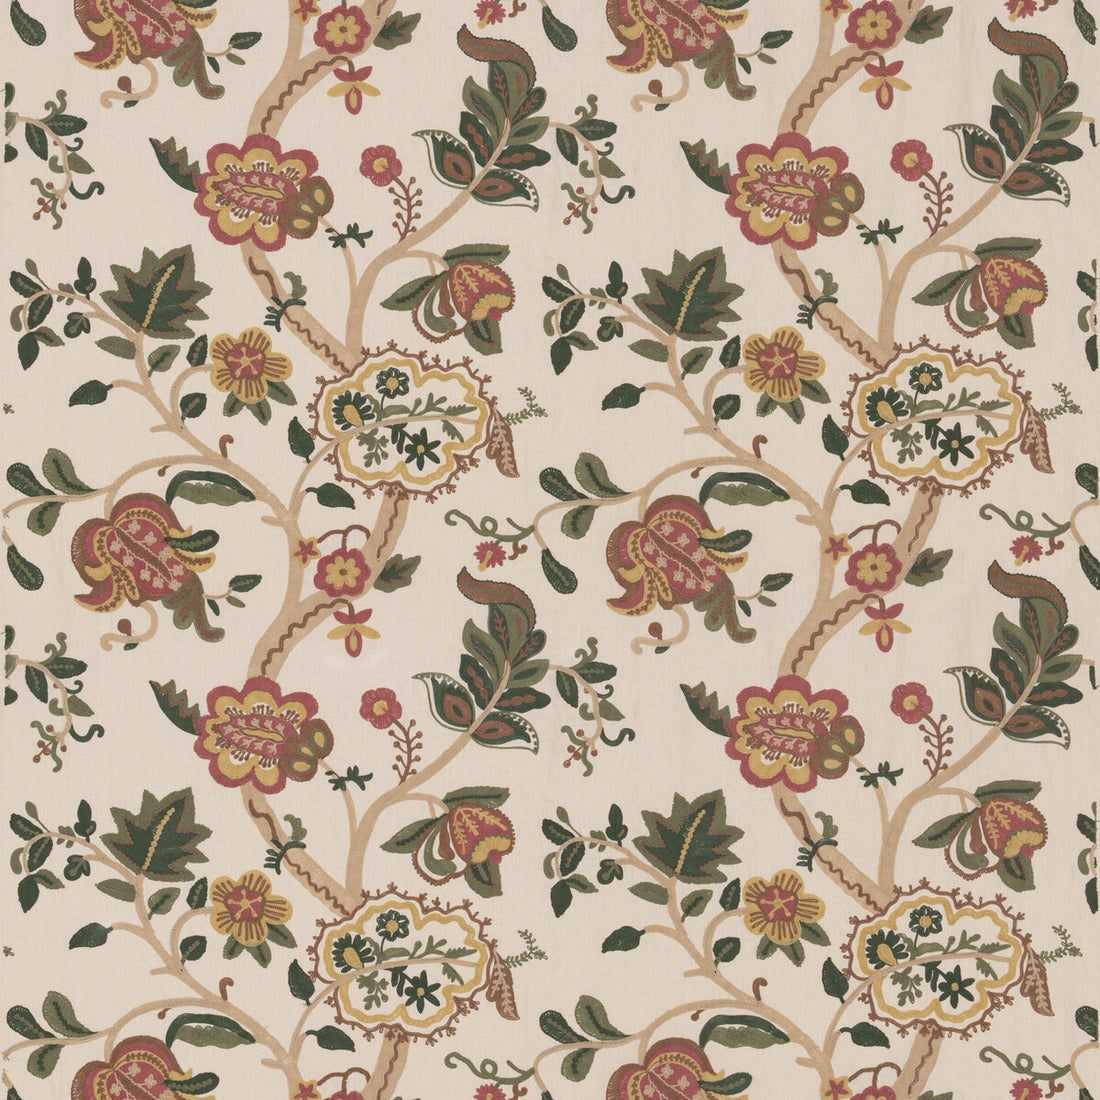 Chewton fabric in rose/green color - pattern BF11022.1.0 - by G P &amp; J Baker in the Burford collection